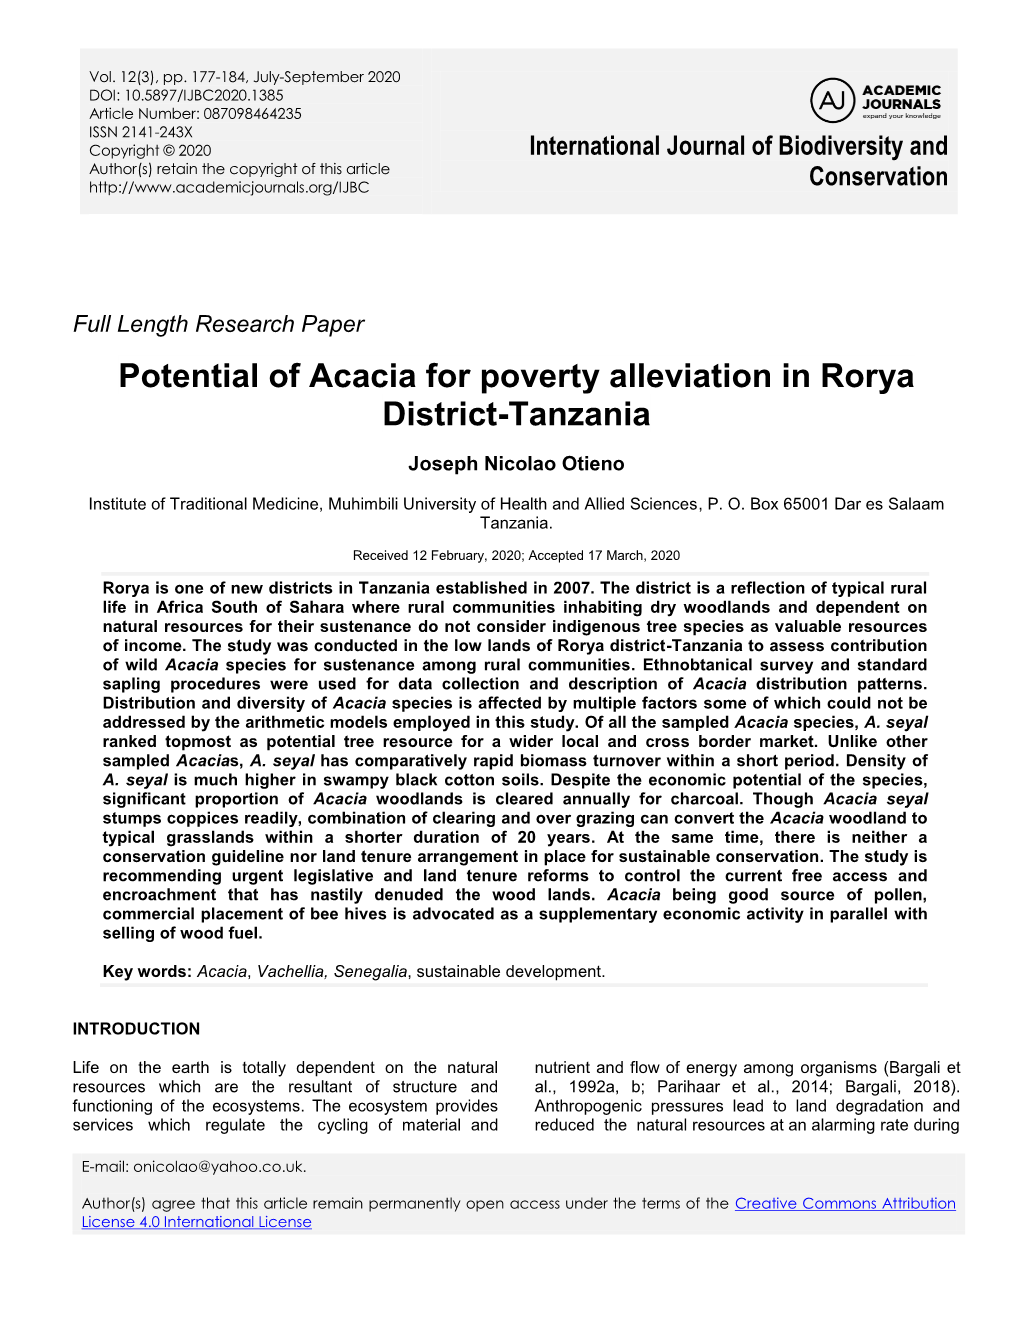 Potential of Acacia for Poverty Alleviation in Rorya District-Tanzania